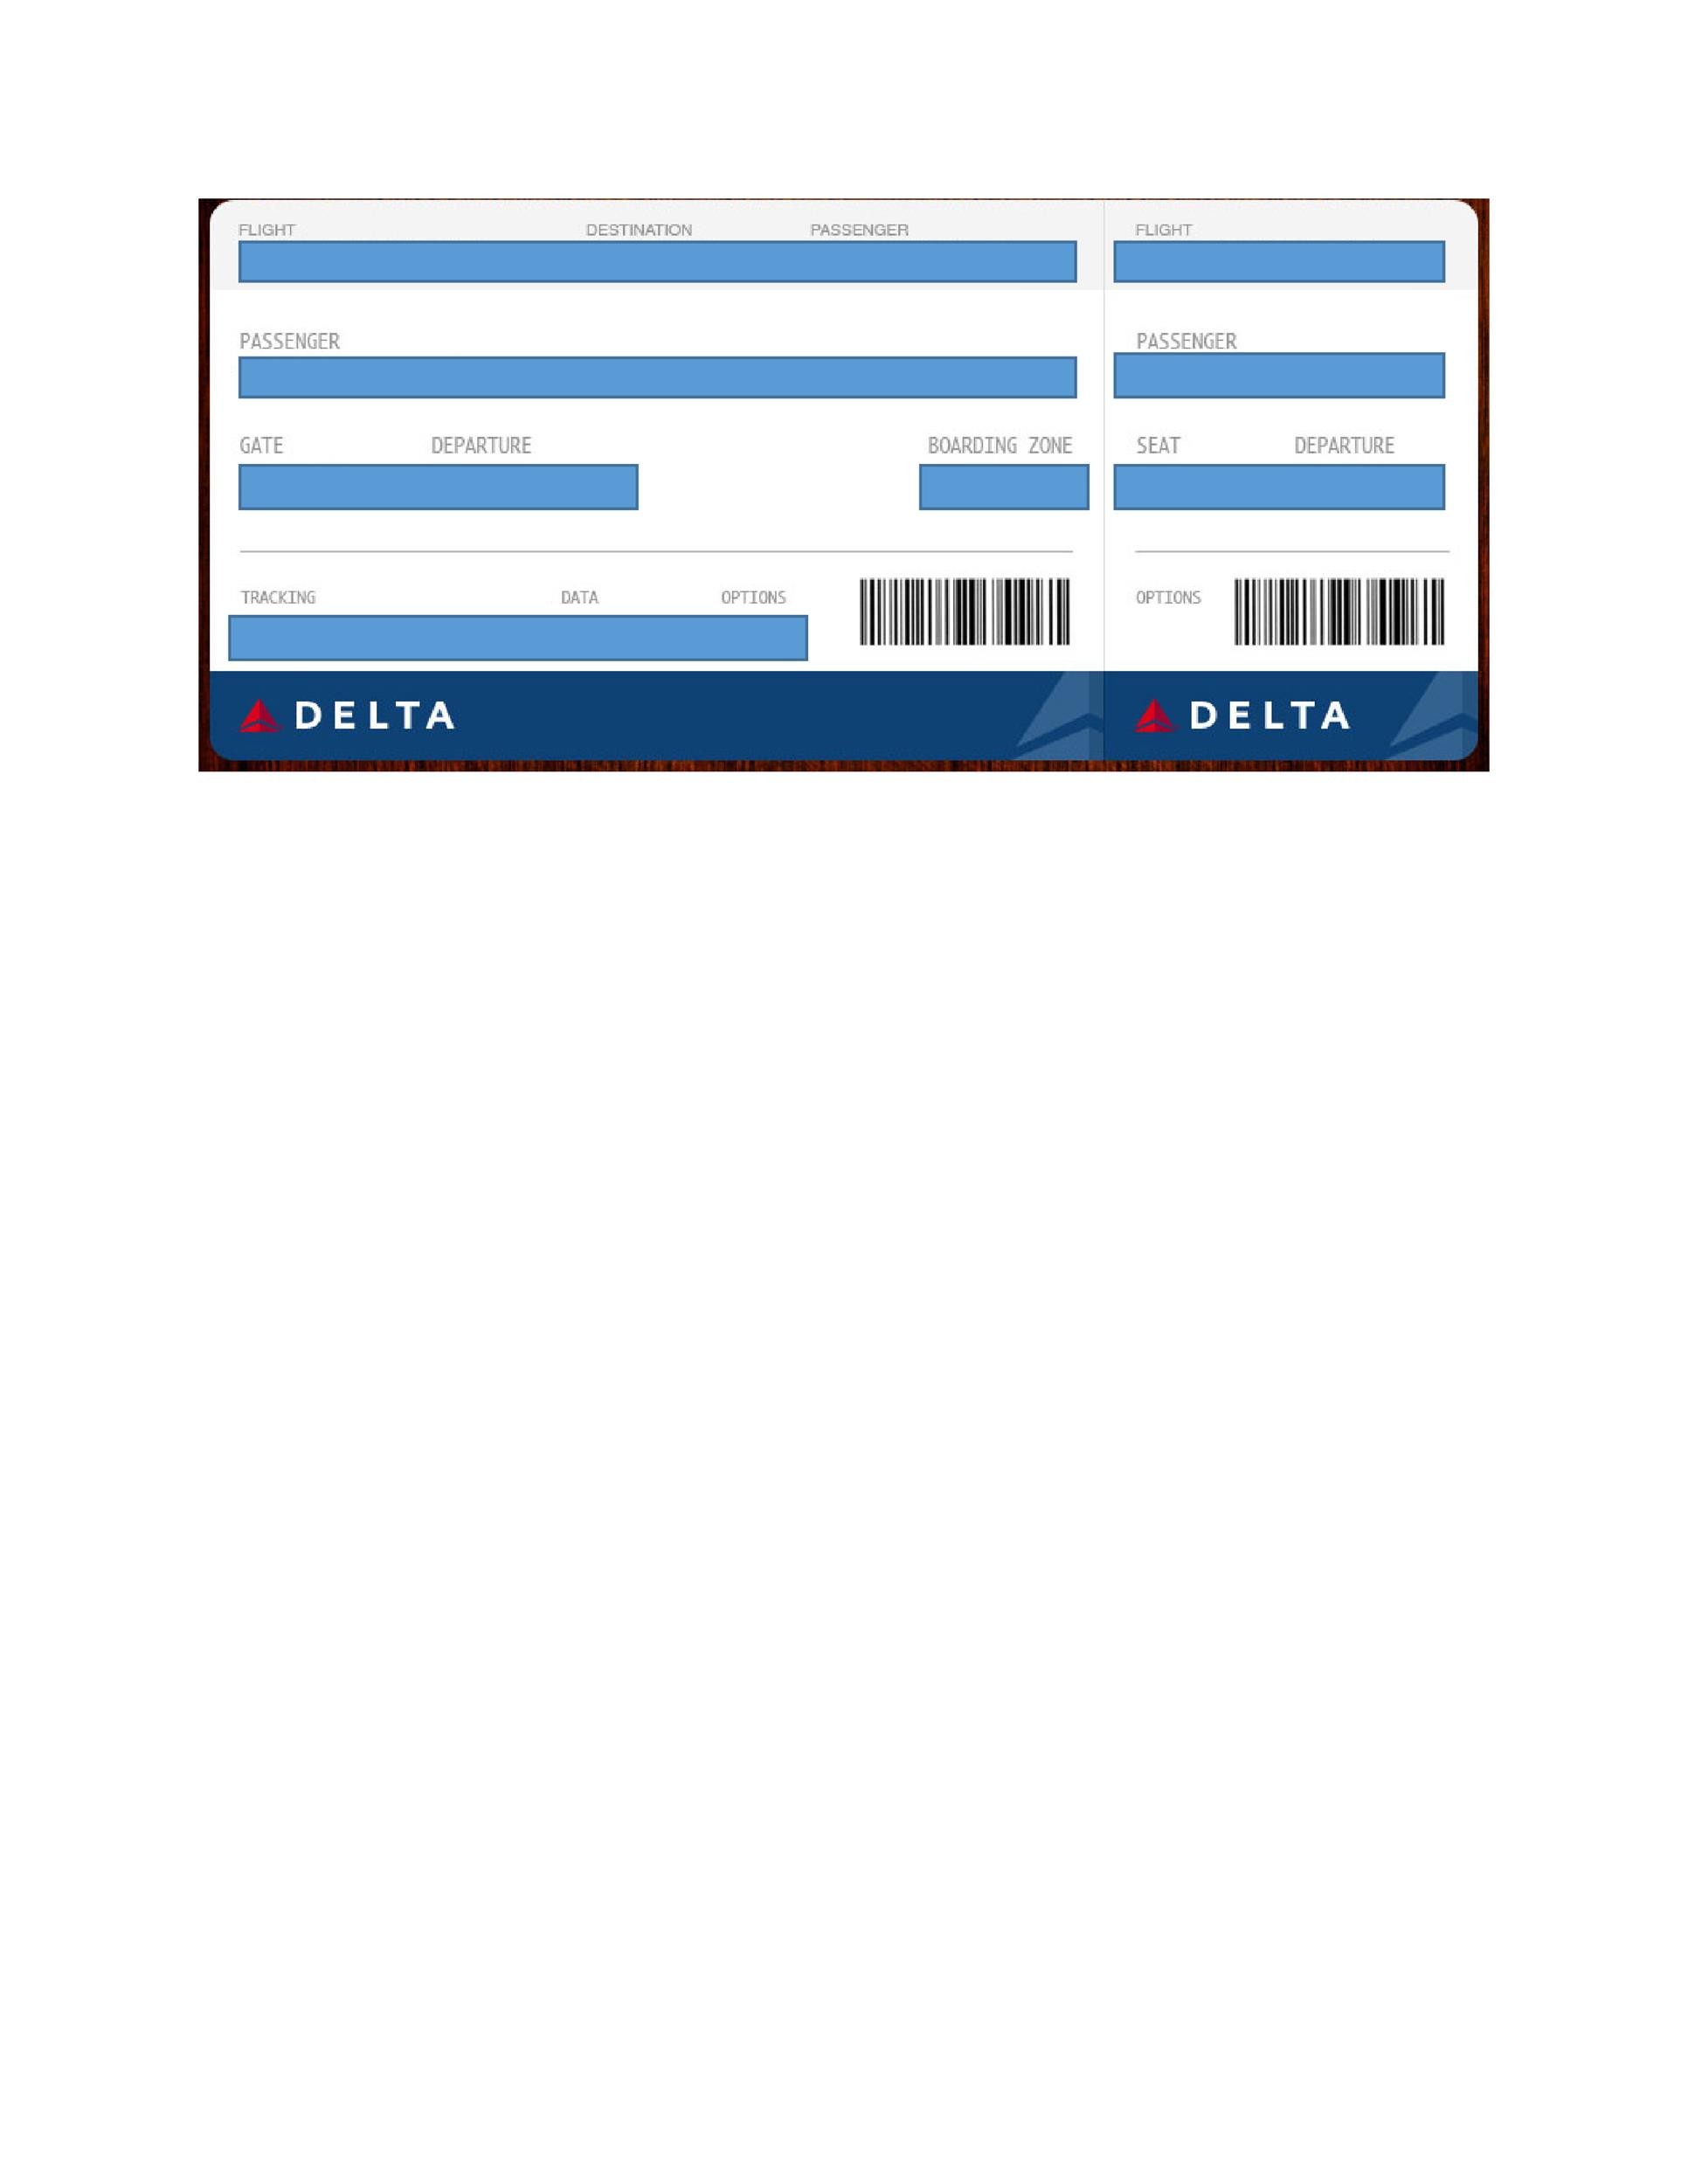 Free boarding pass template 10